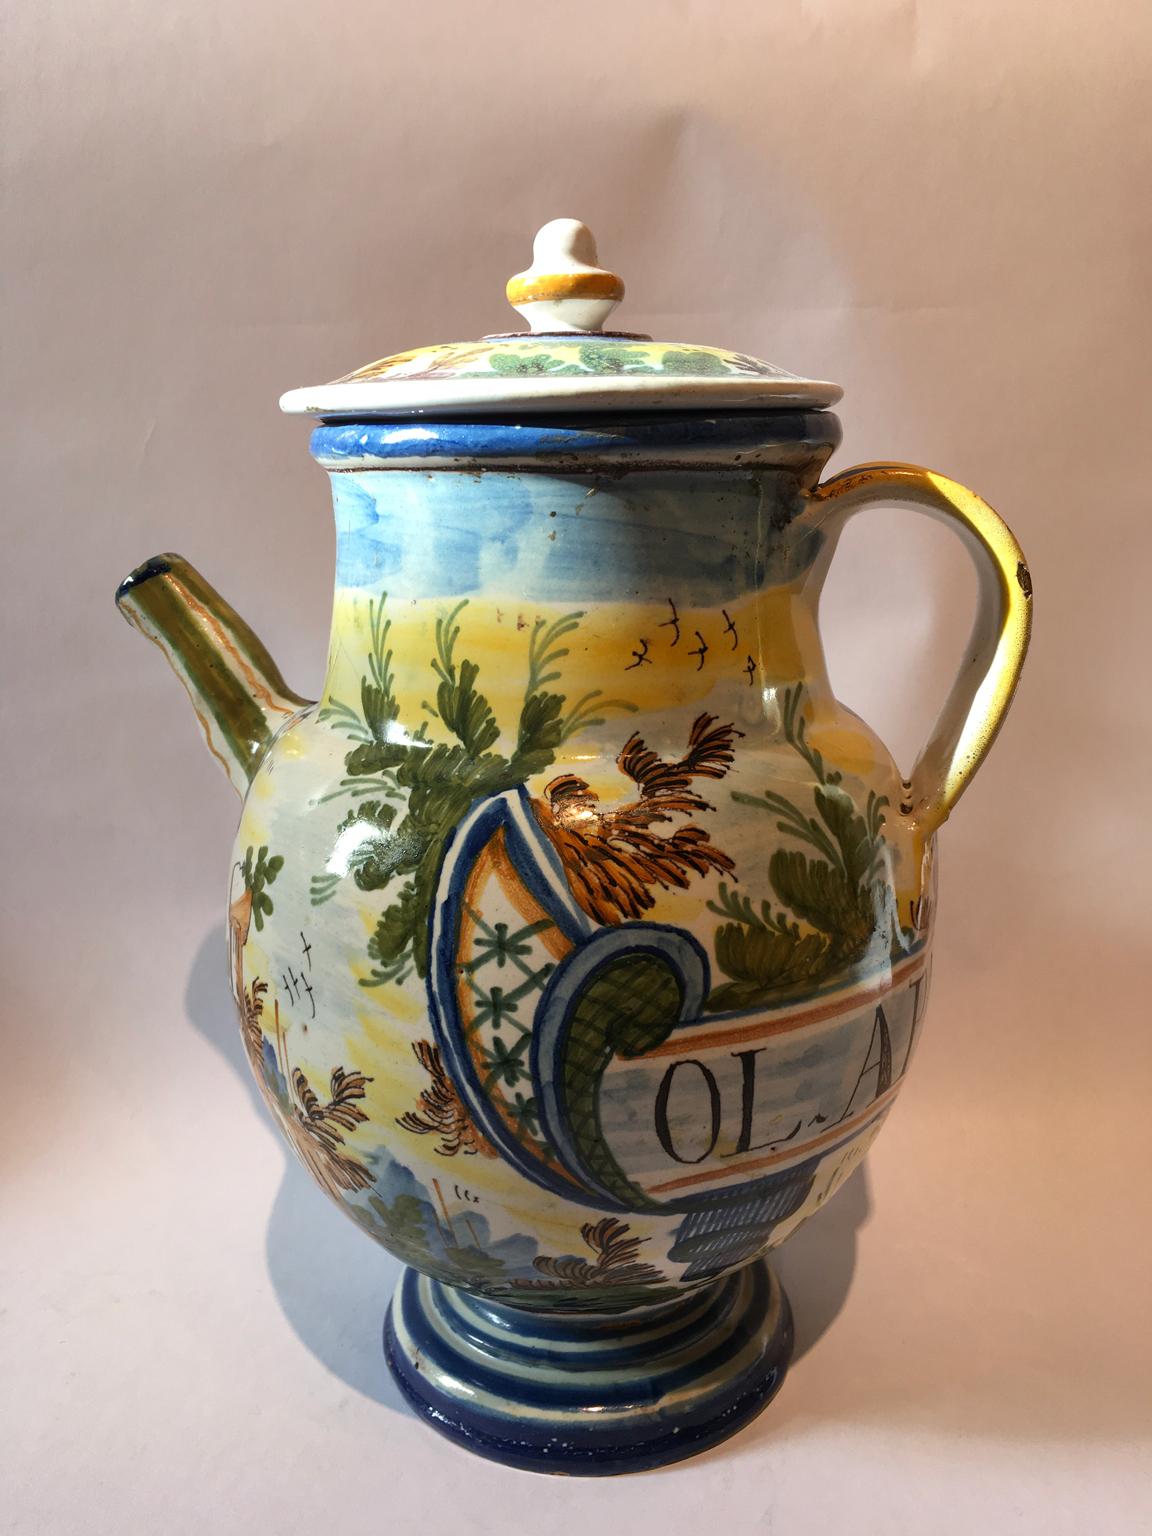 Rustic Italy Mid-18th Century Pharmacy Ceramic Carafe in Yellow Blue with Landscape